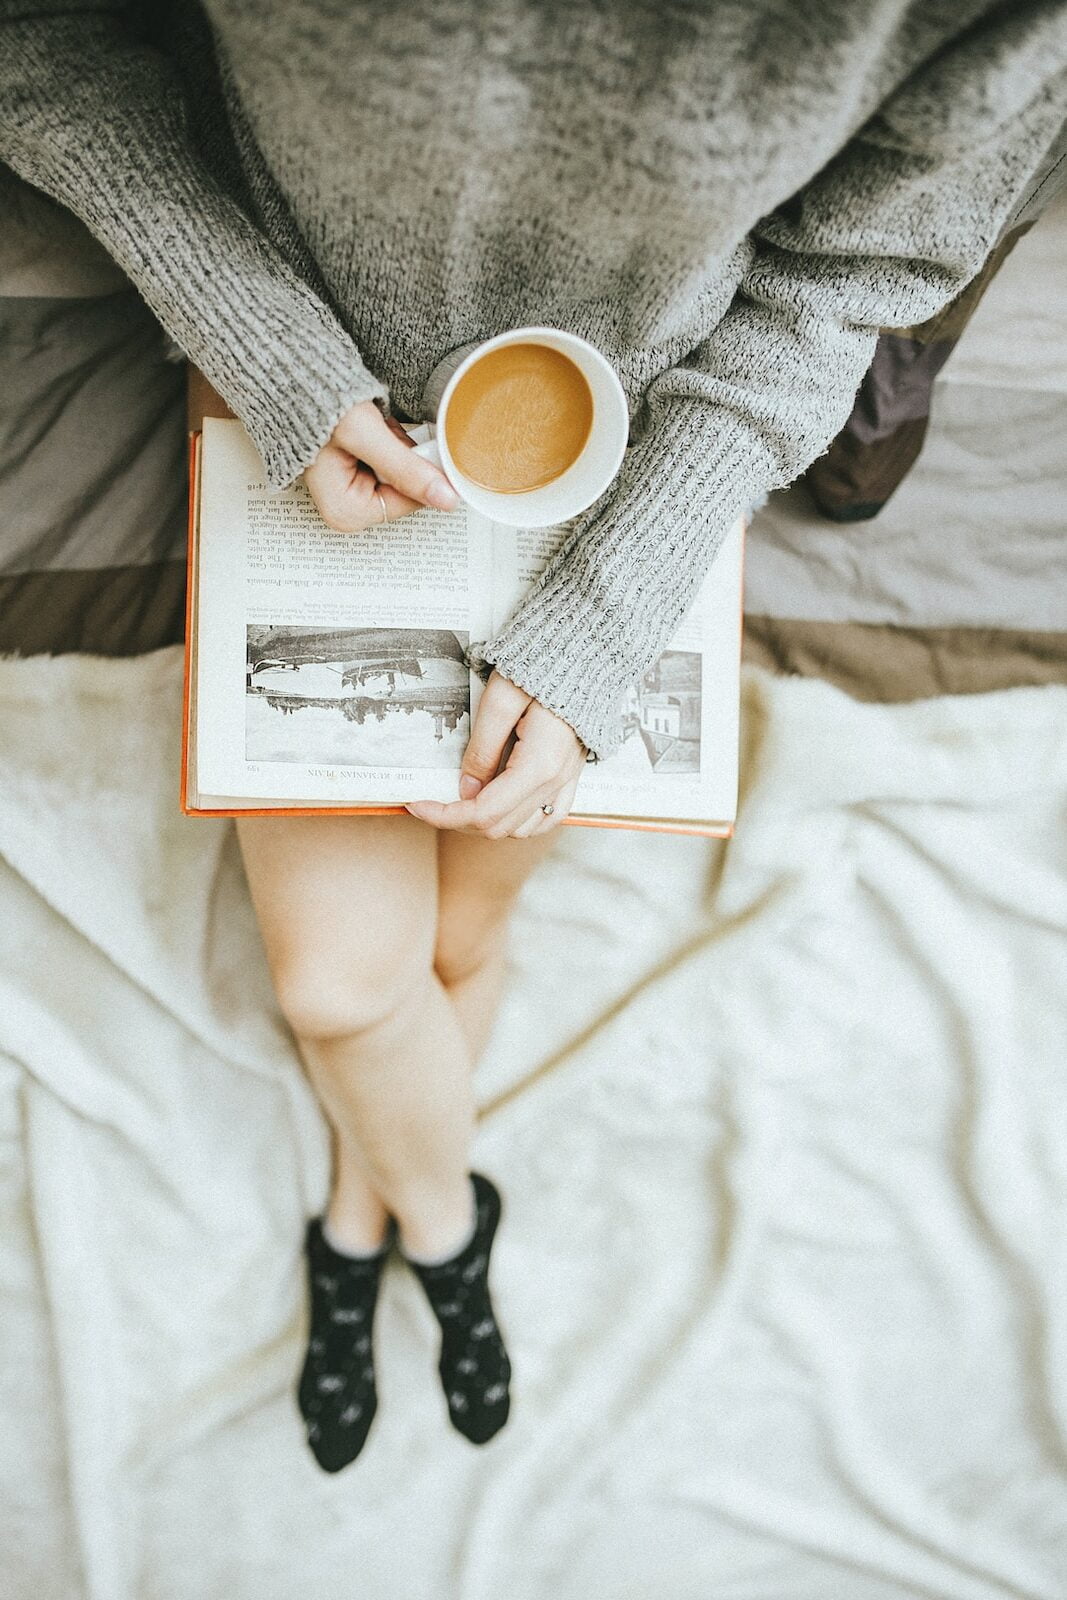 woman holding a cup of coffee at right hand and reading book on her lap while holding it open with her left hand in a well-lit room